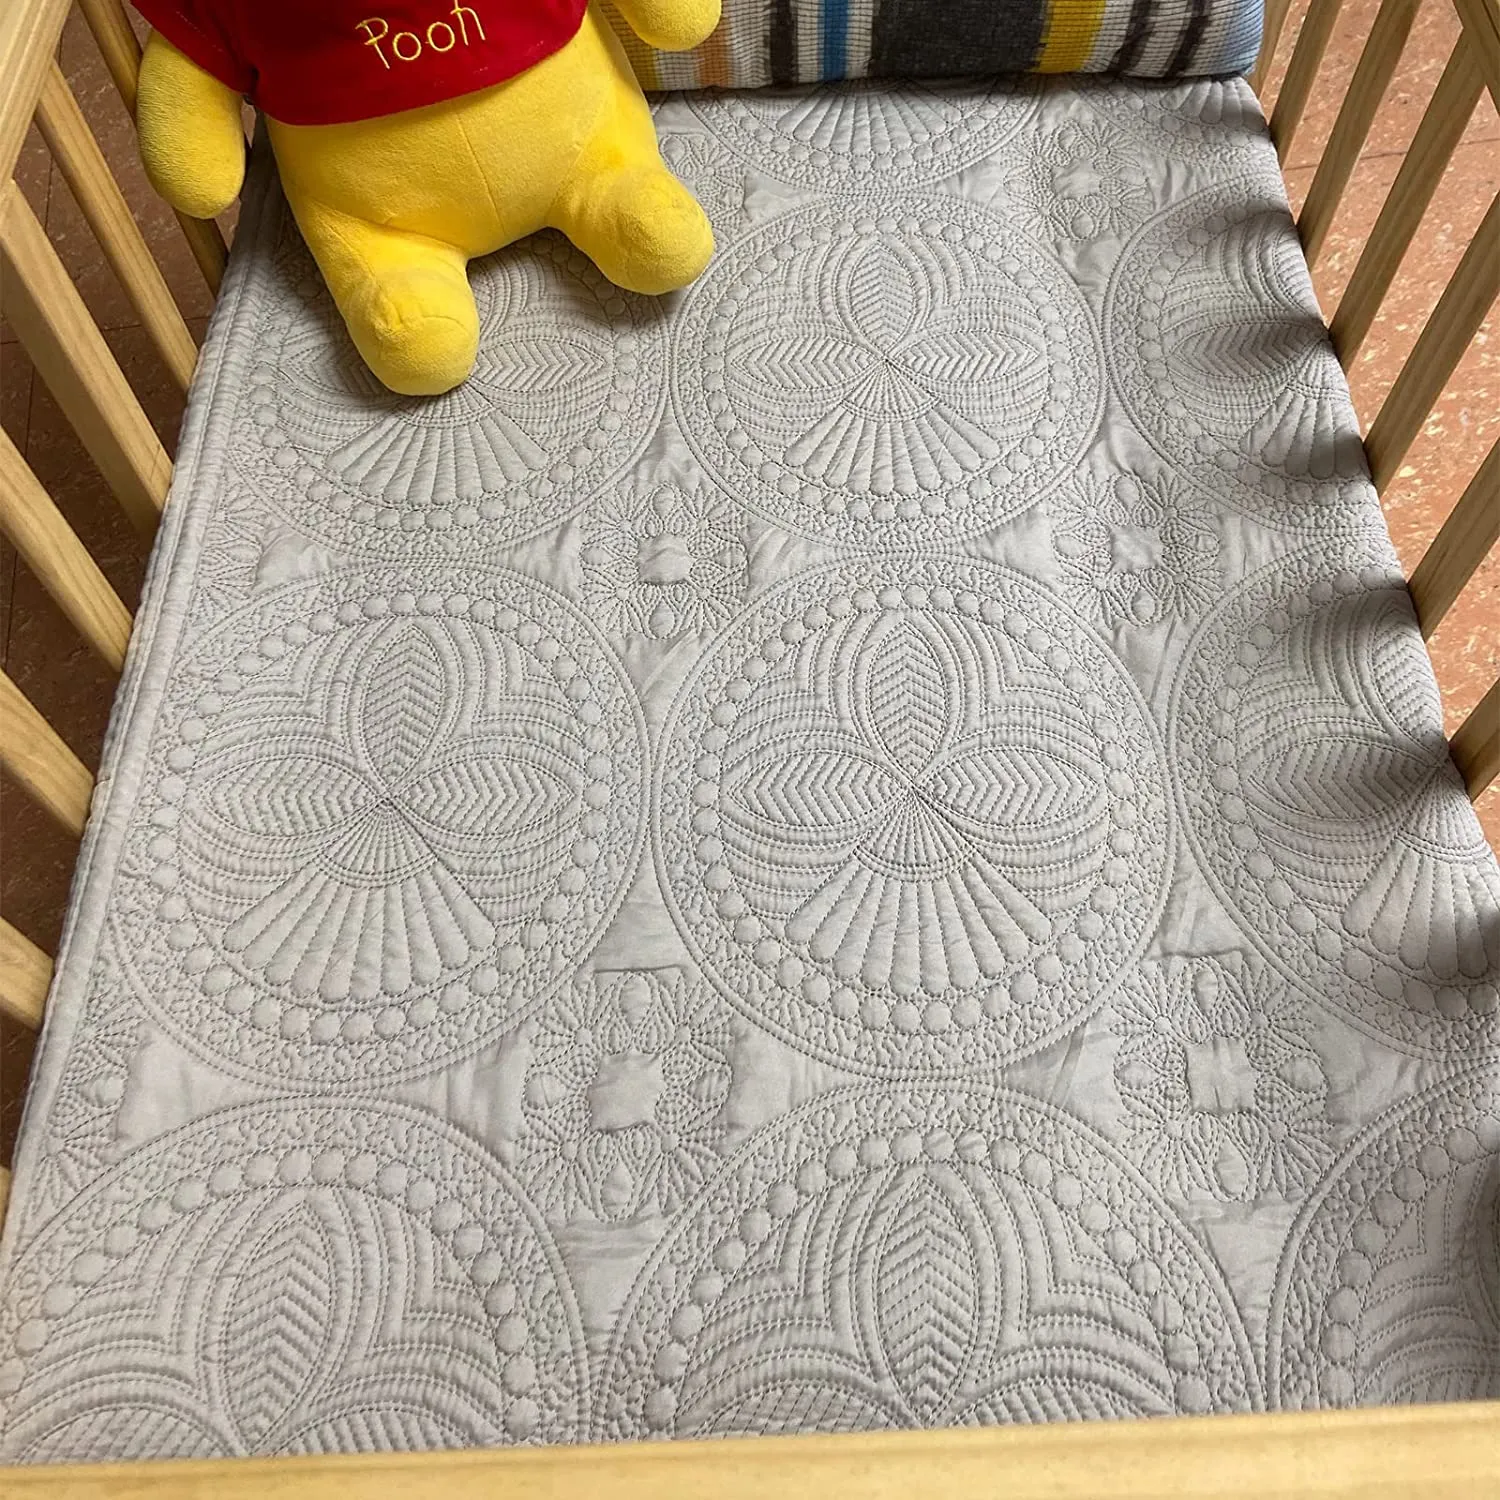 Gray Scalloped Cotton Quilted Blankets 25pcs Lot GA Warehouse Embroidery Bloossoming Heirloom Baby Gift Blanket Soft Baby Crib Covers DOM106538